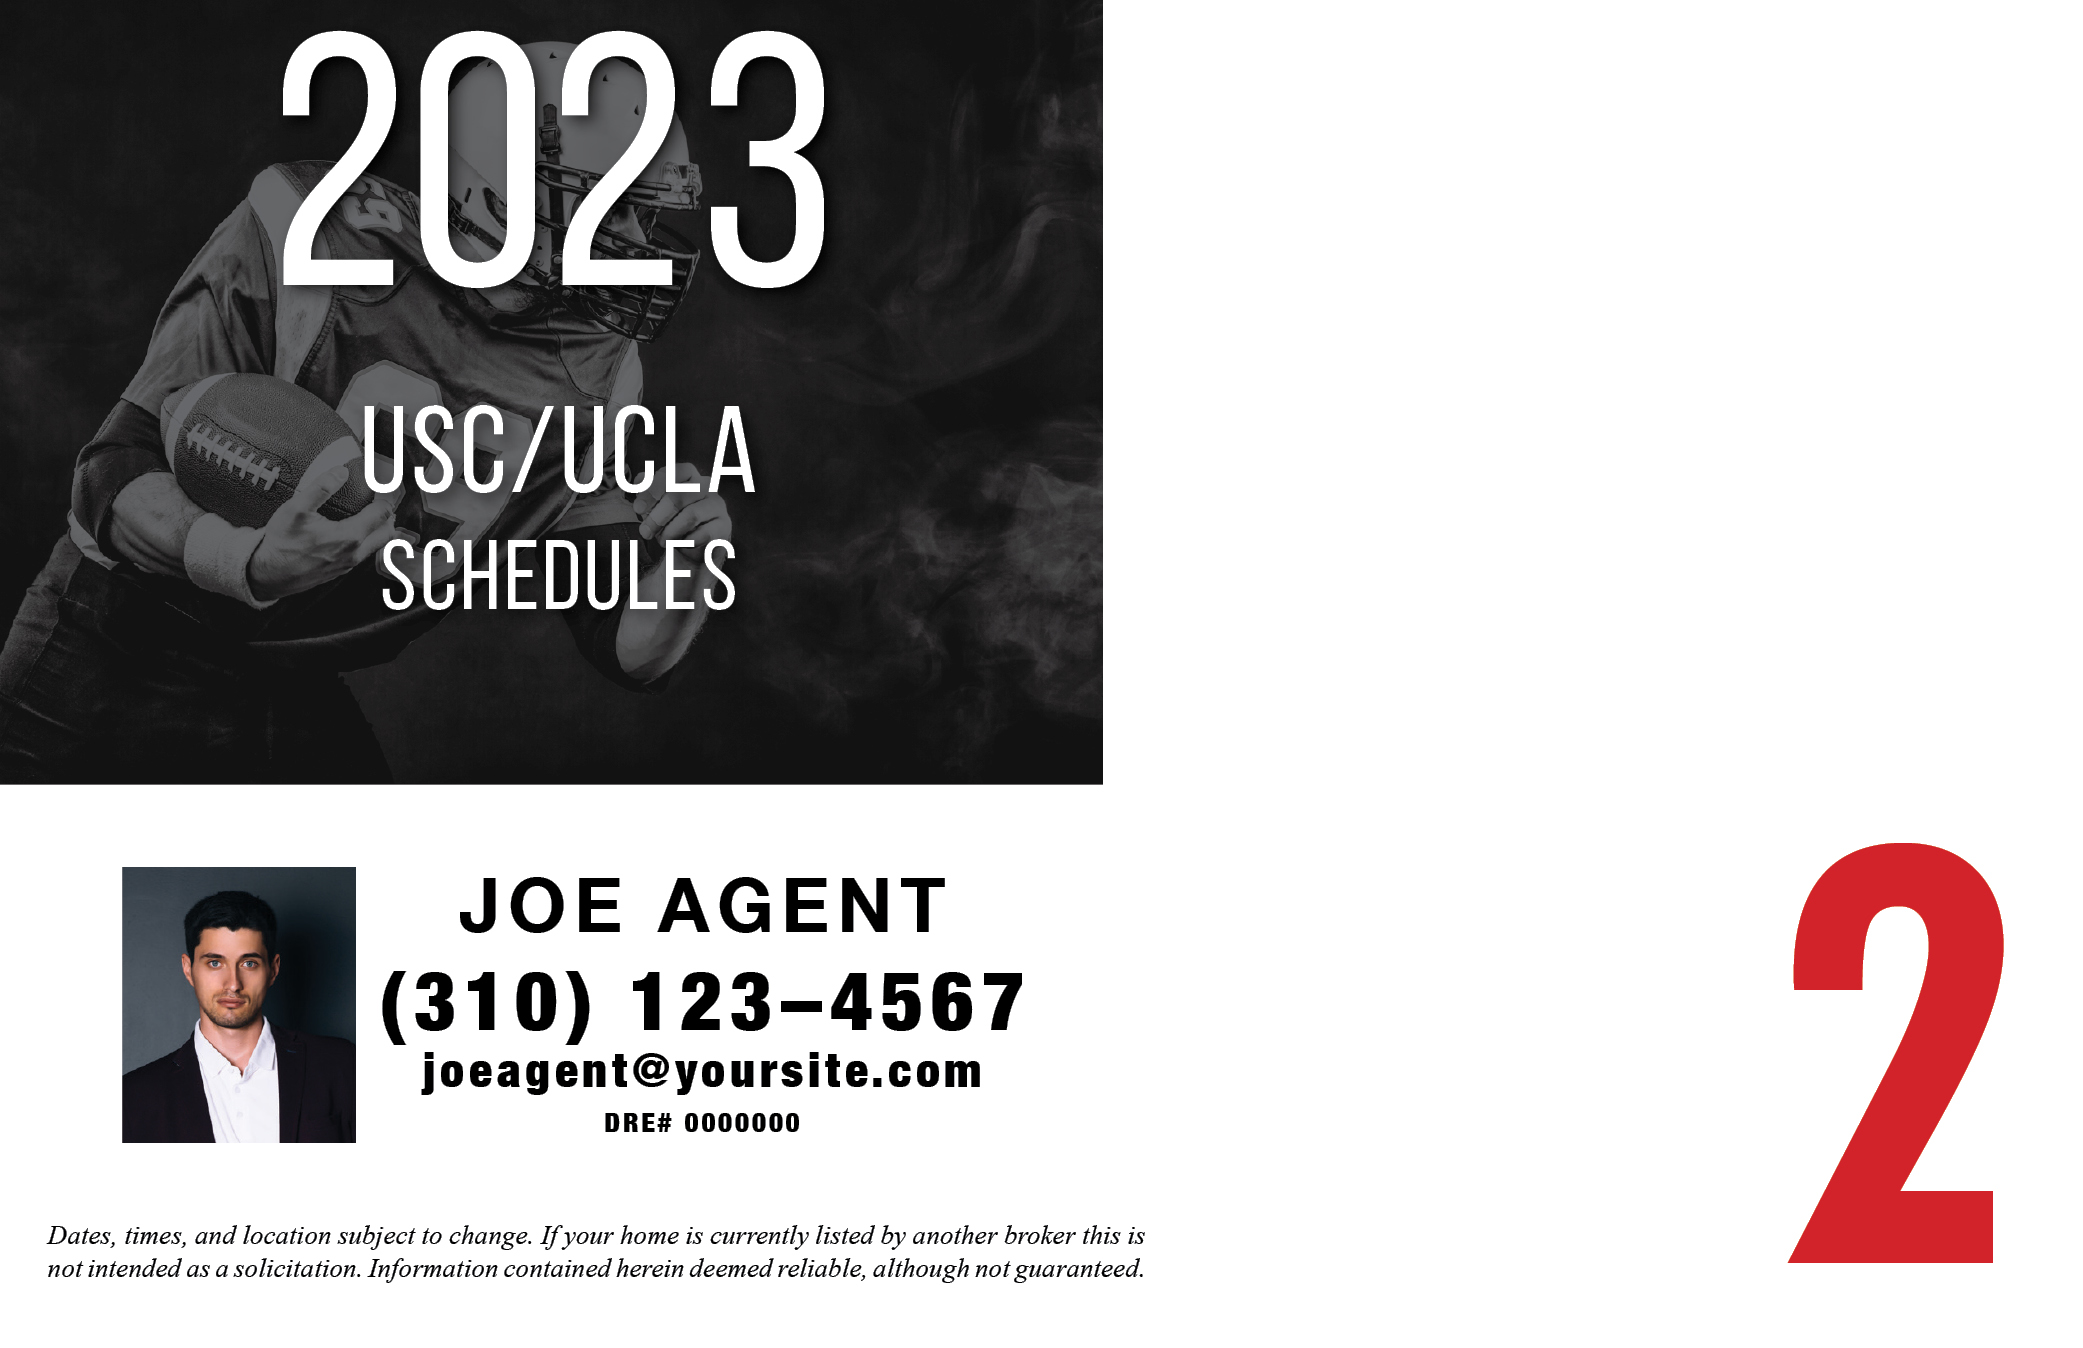 Example 2 of a USC UCLA Football Schedule Postcard (Back)